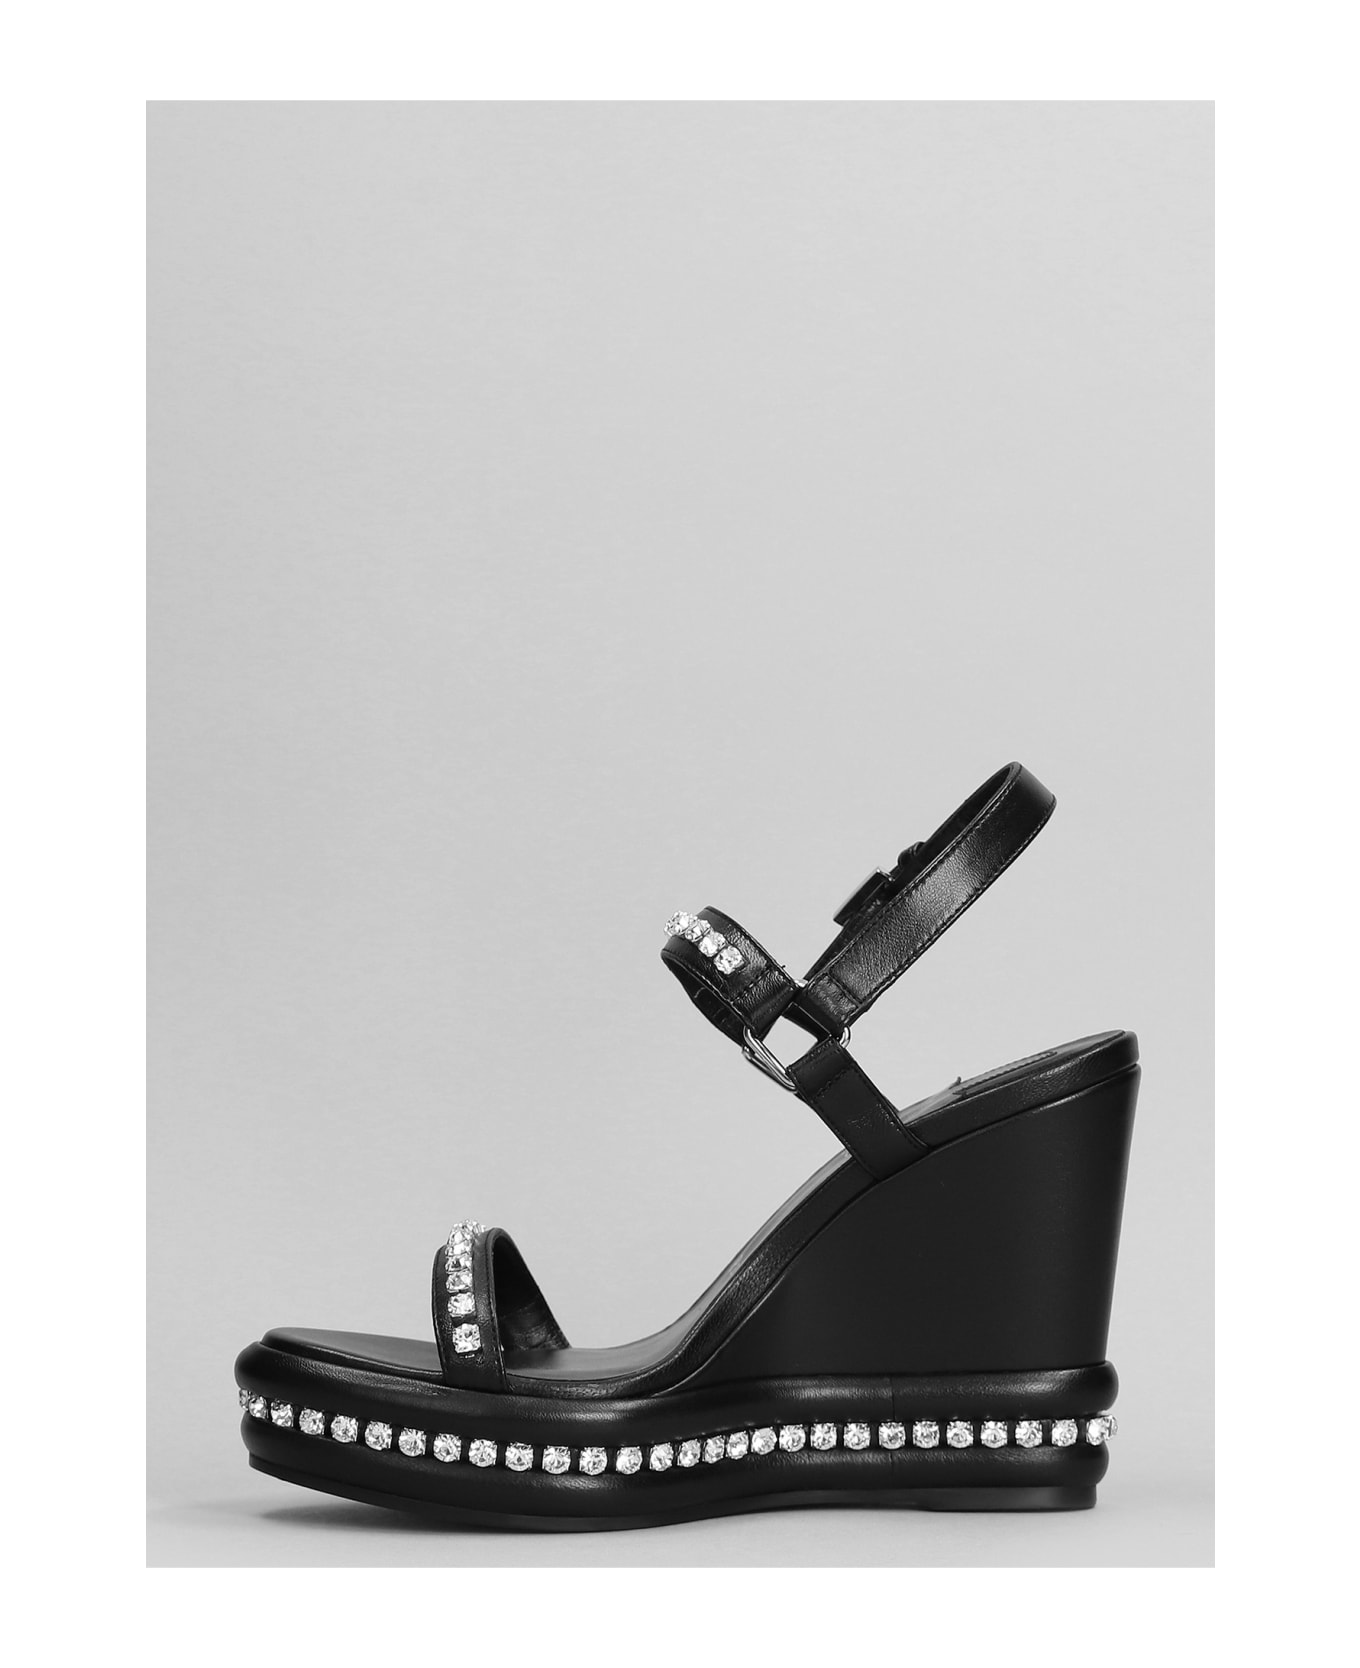 Christian Louboutin Pyrastrass 110 Wedges In Black Leather - black